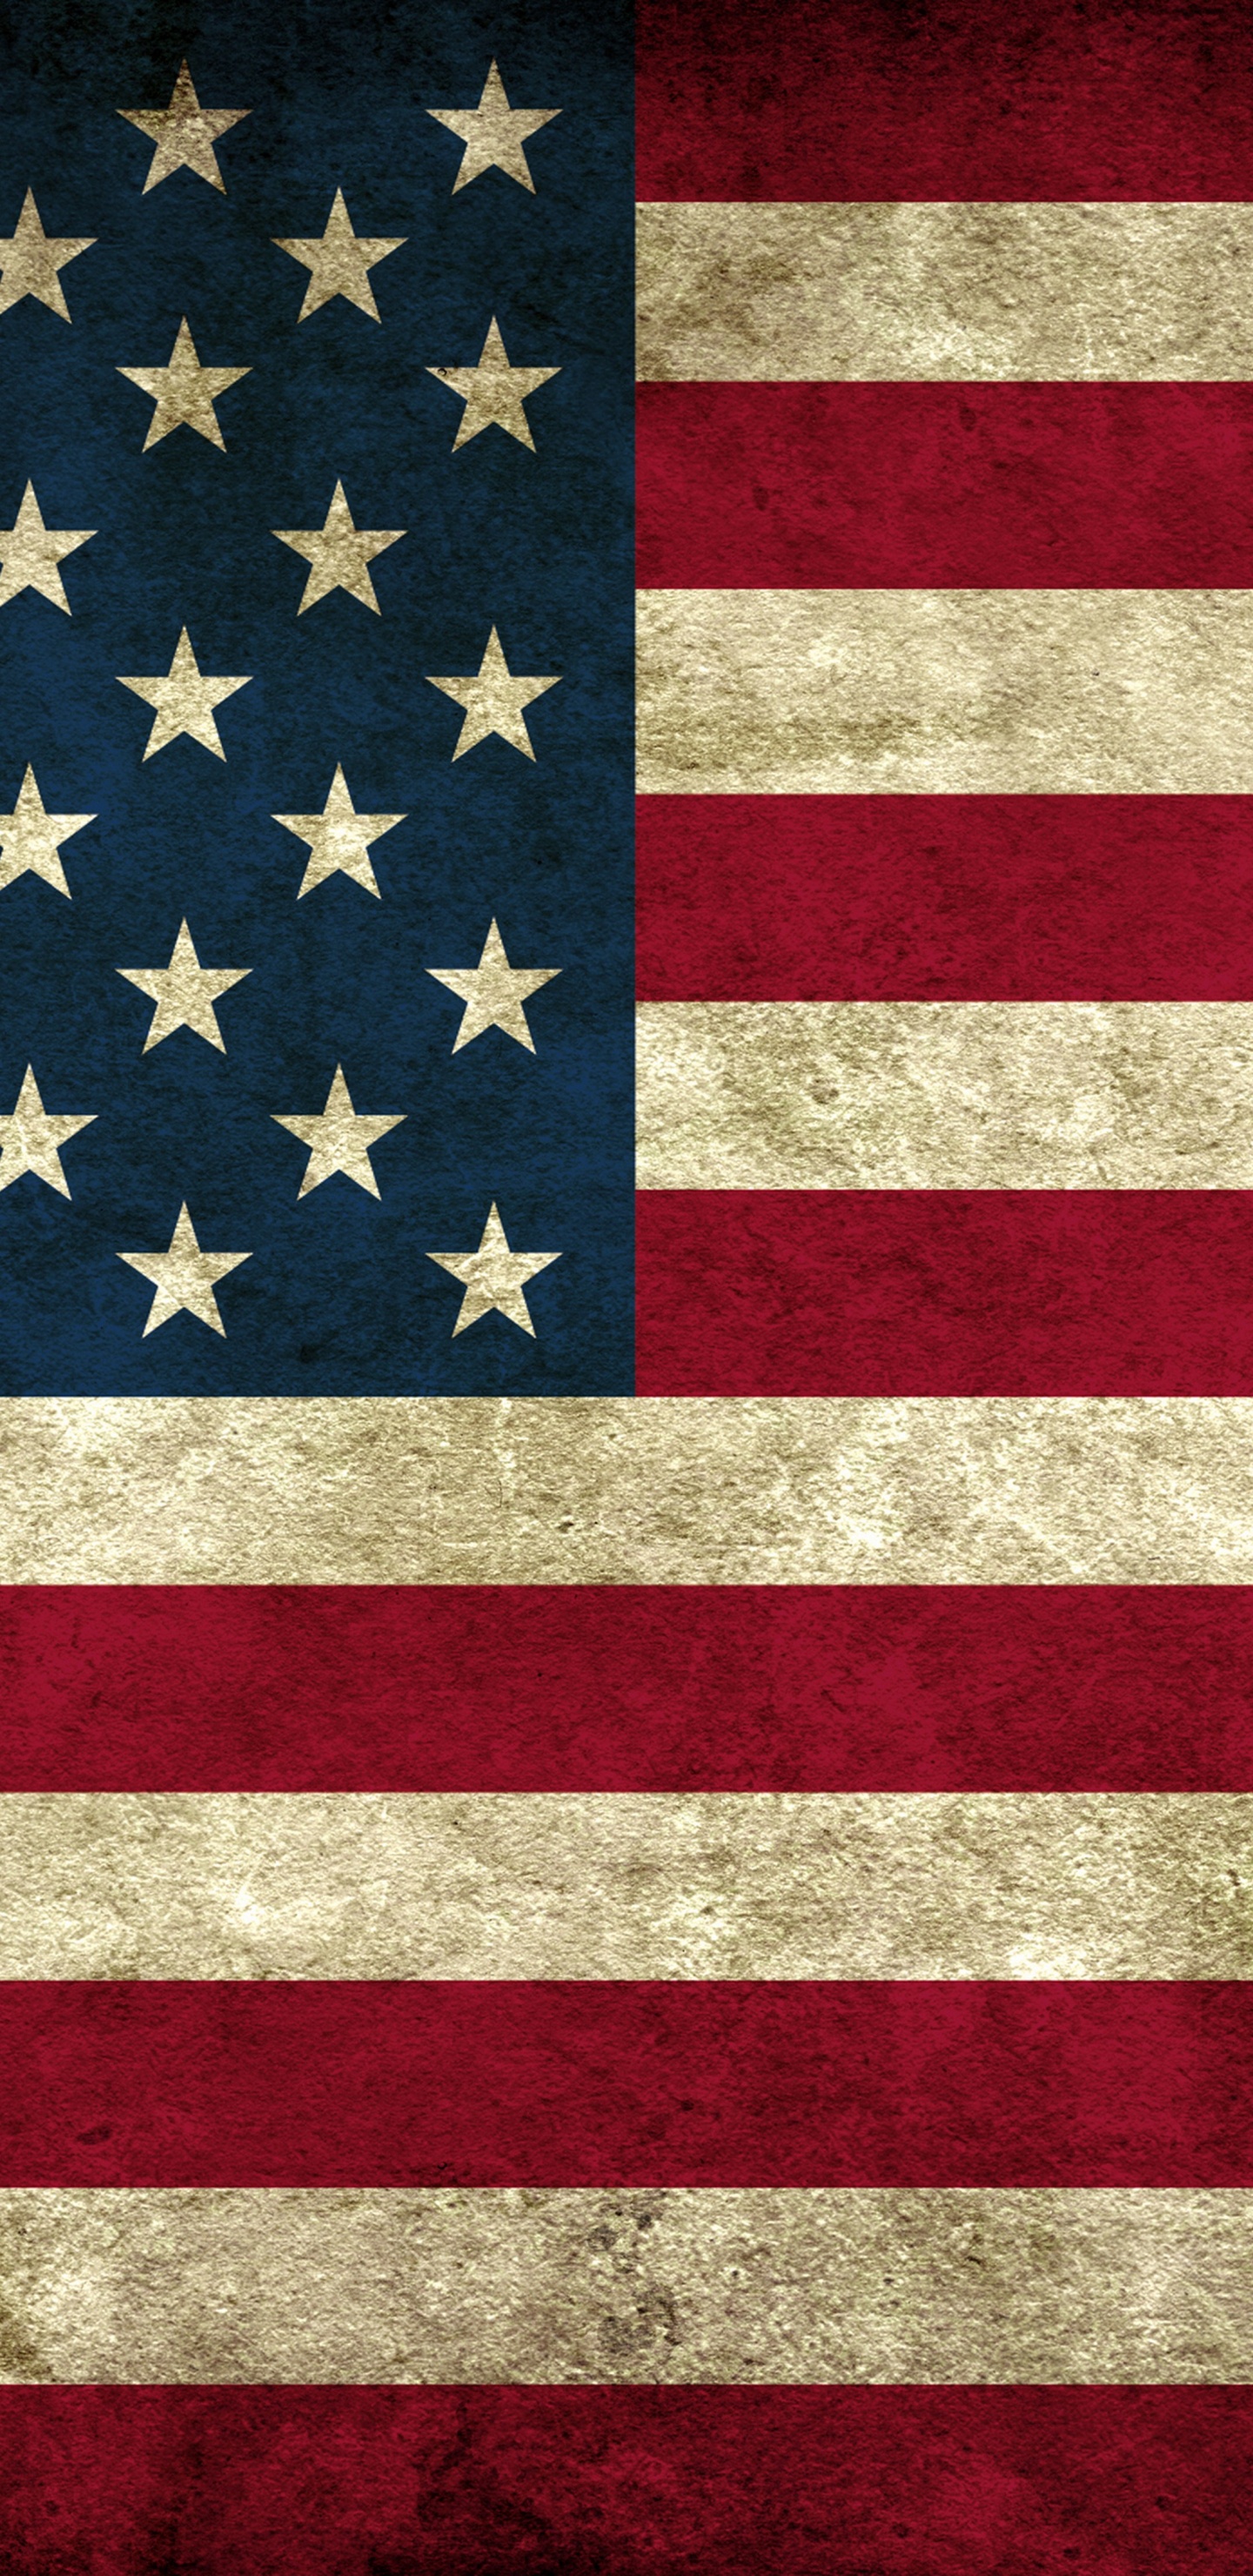 us a Flag on Red and White Striped Textile. Wallpaper in 1440x2960 Resolution